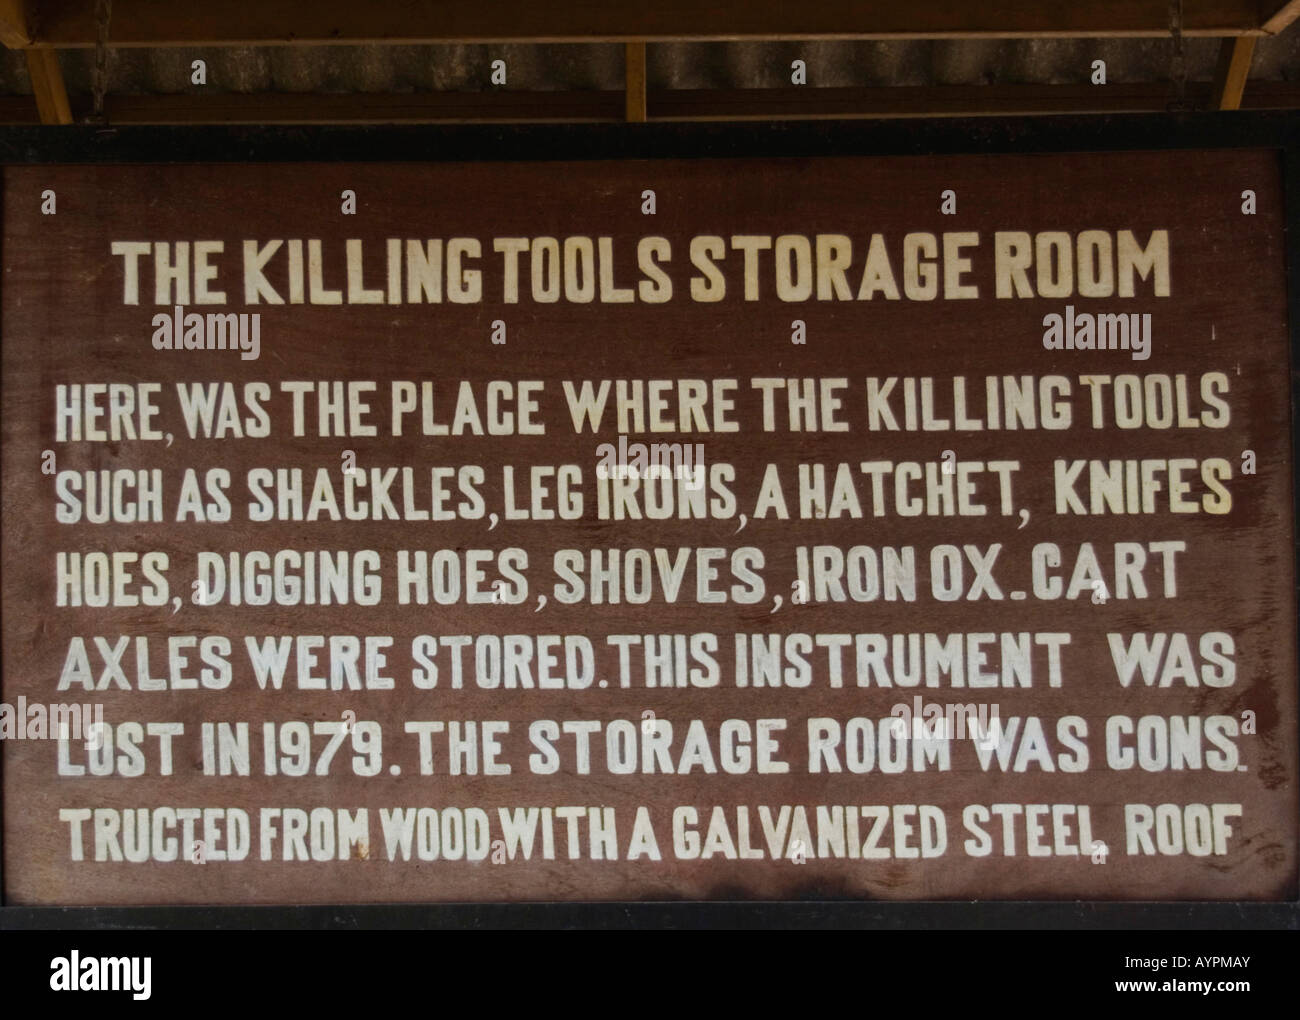 Plaque describing atrocities committed by the Khmer Rouge during the Killing Fields era, Phnom Penh, Cambodia, Asia Stock Photo